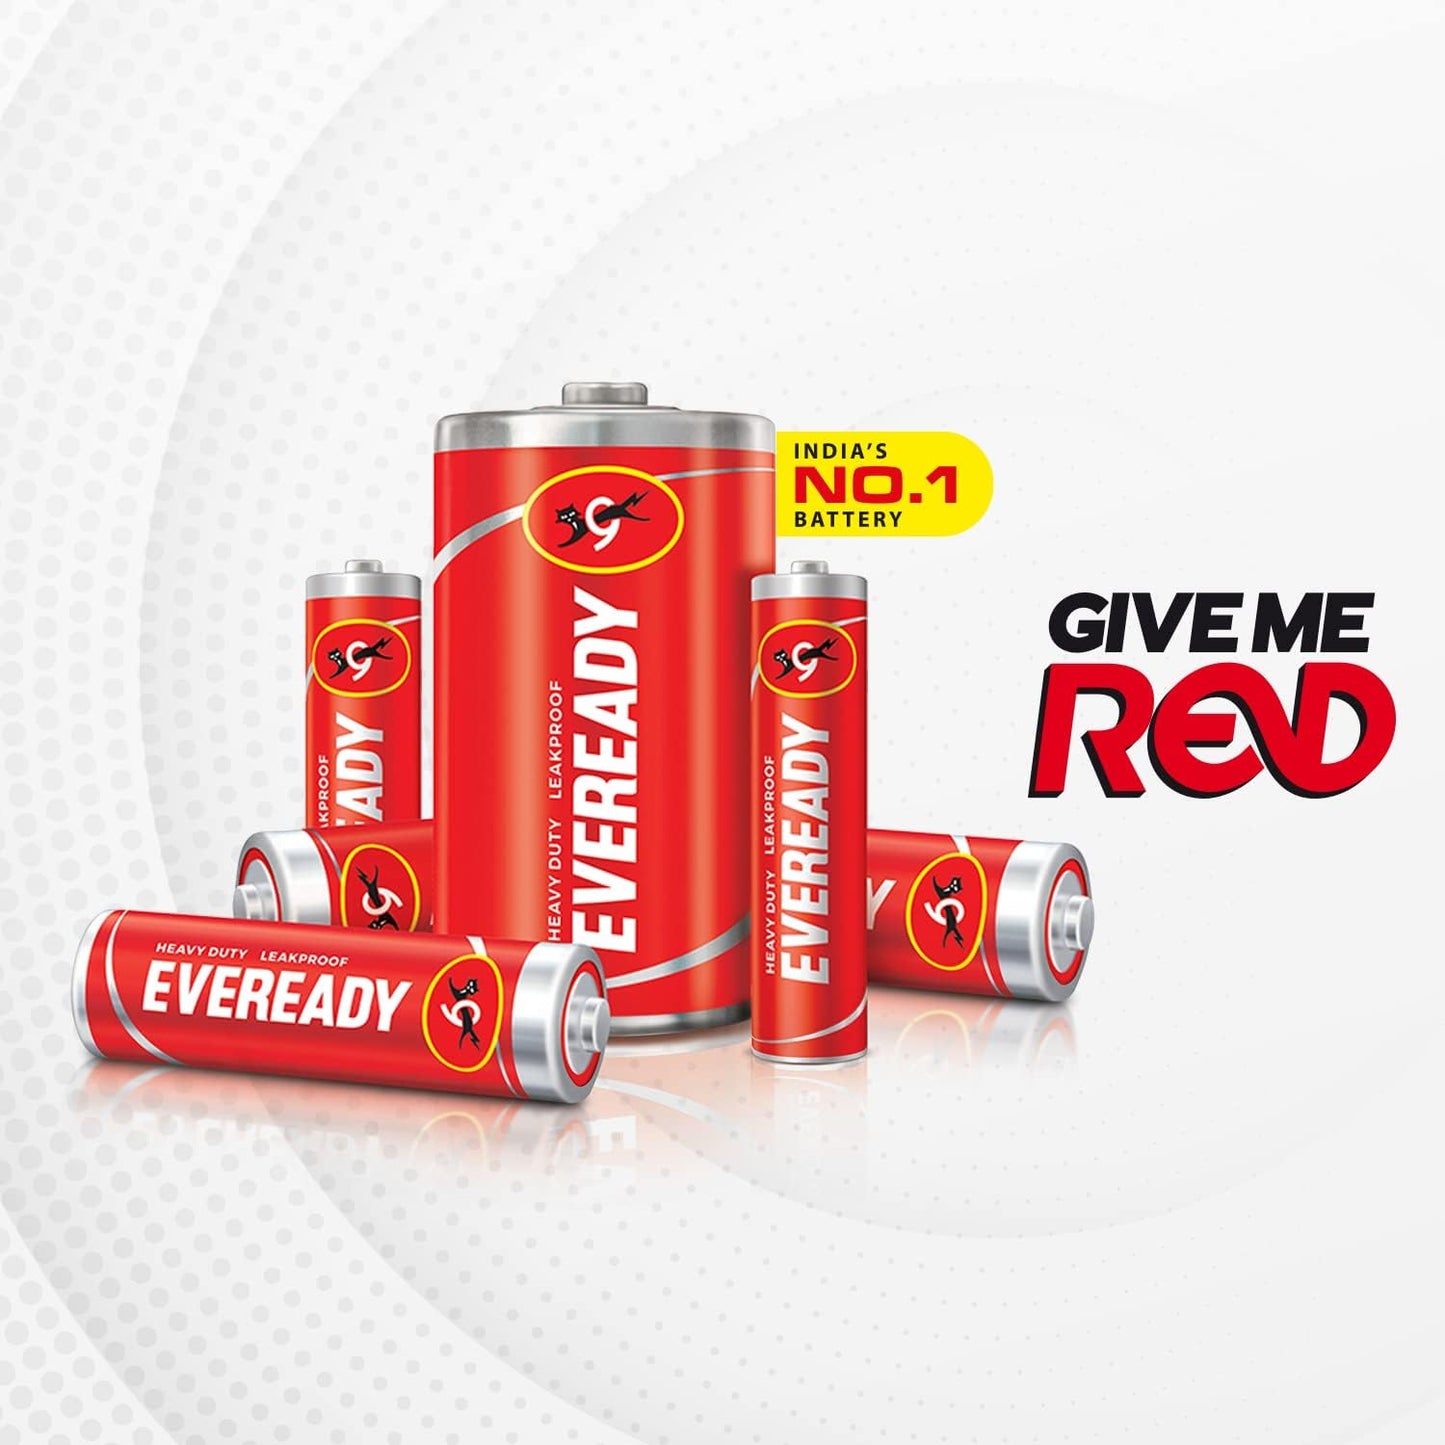 Eveready Carbon Zinc AAA Batteries | 1.5 Volt | Highly Durable & Leak Proof | AAA Battery for Household and Office Devices